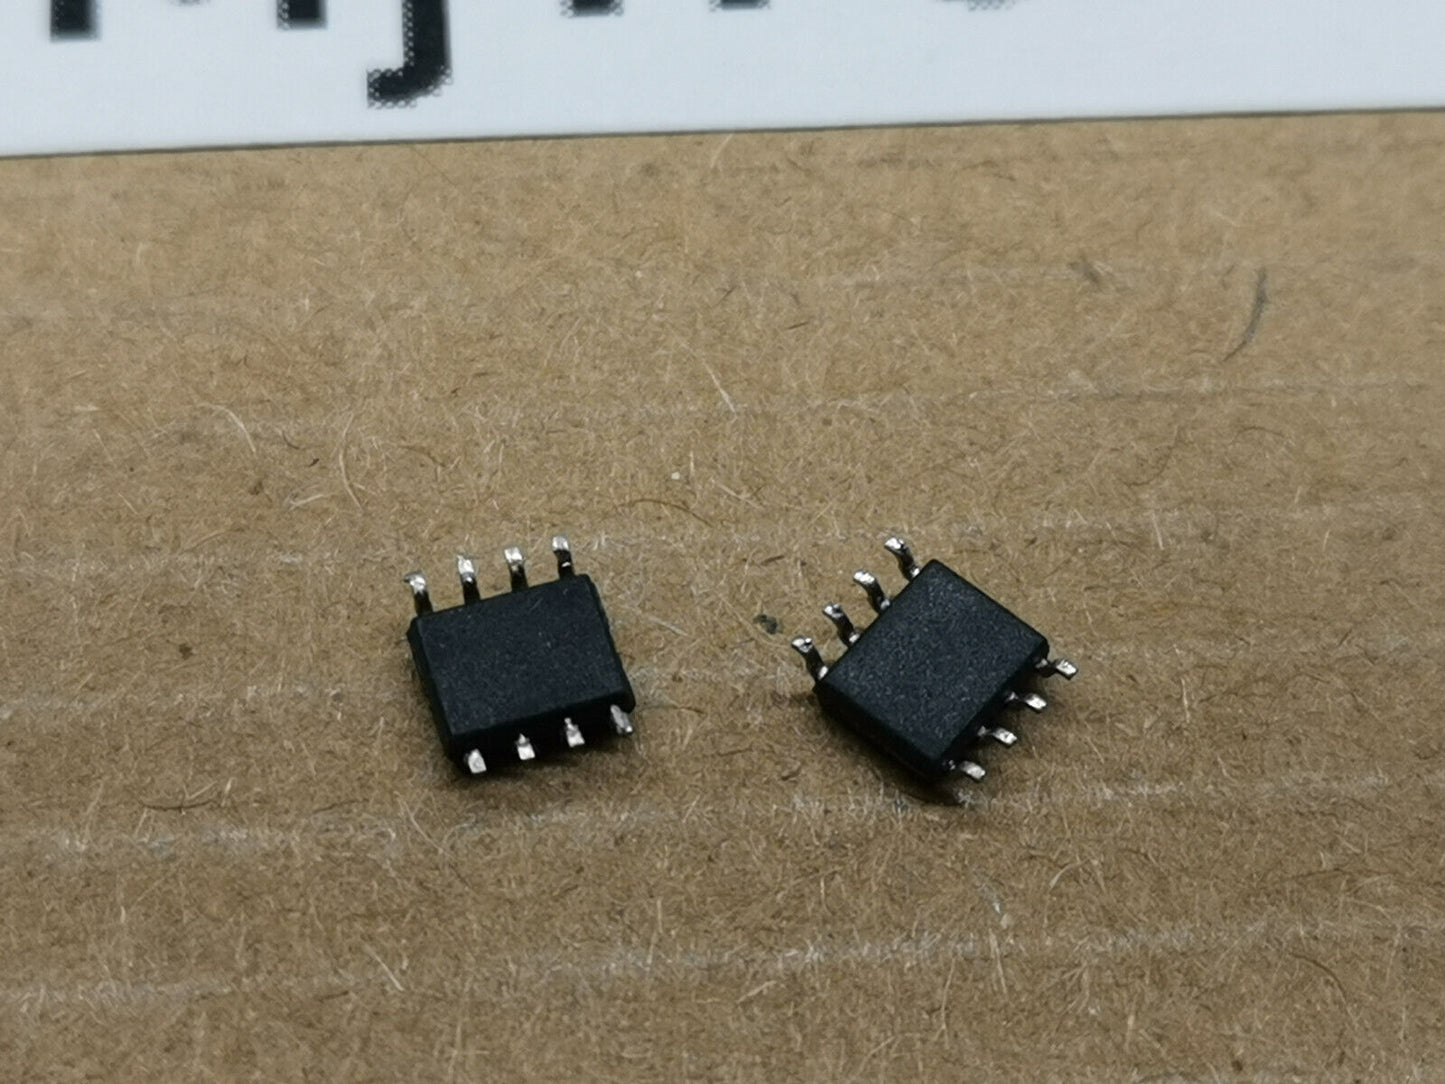 2pcs Genuine AD822 Dual Precision Low Power FET Input Operational Amplifiers